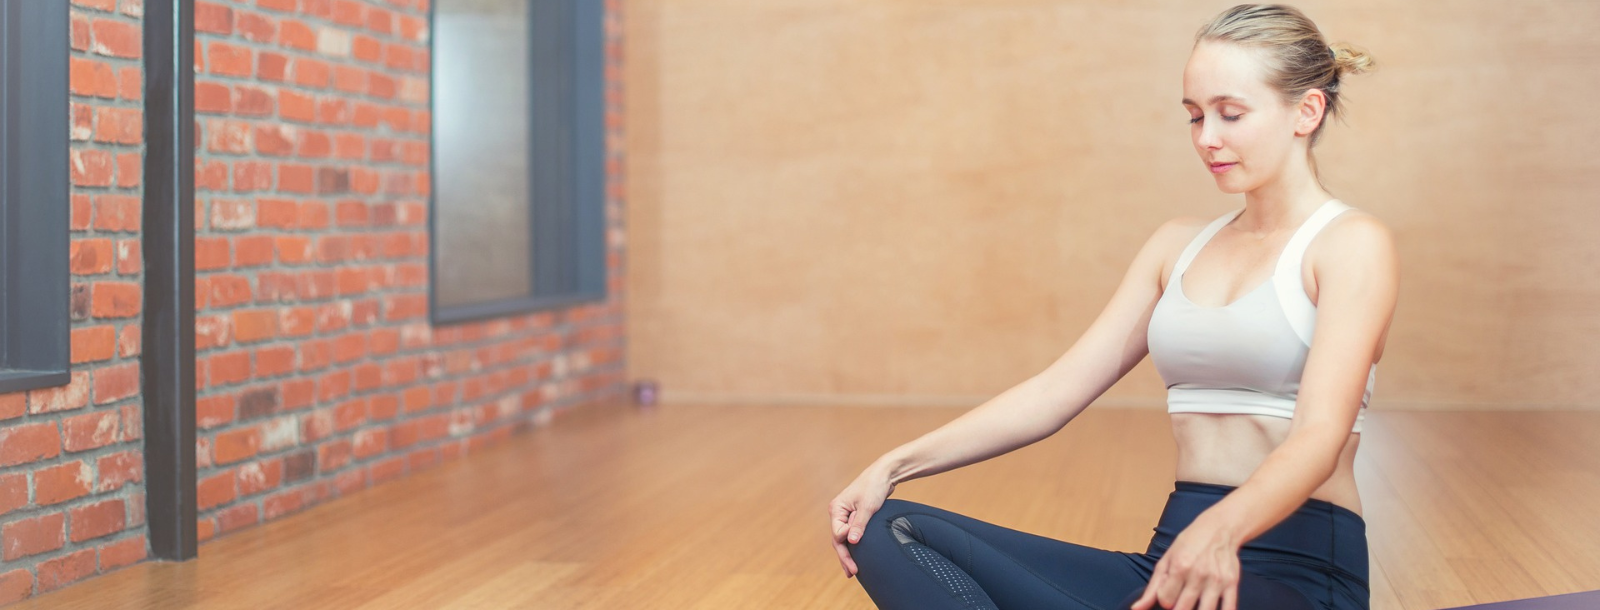 woman sitting on floor to meditate simply